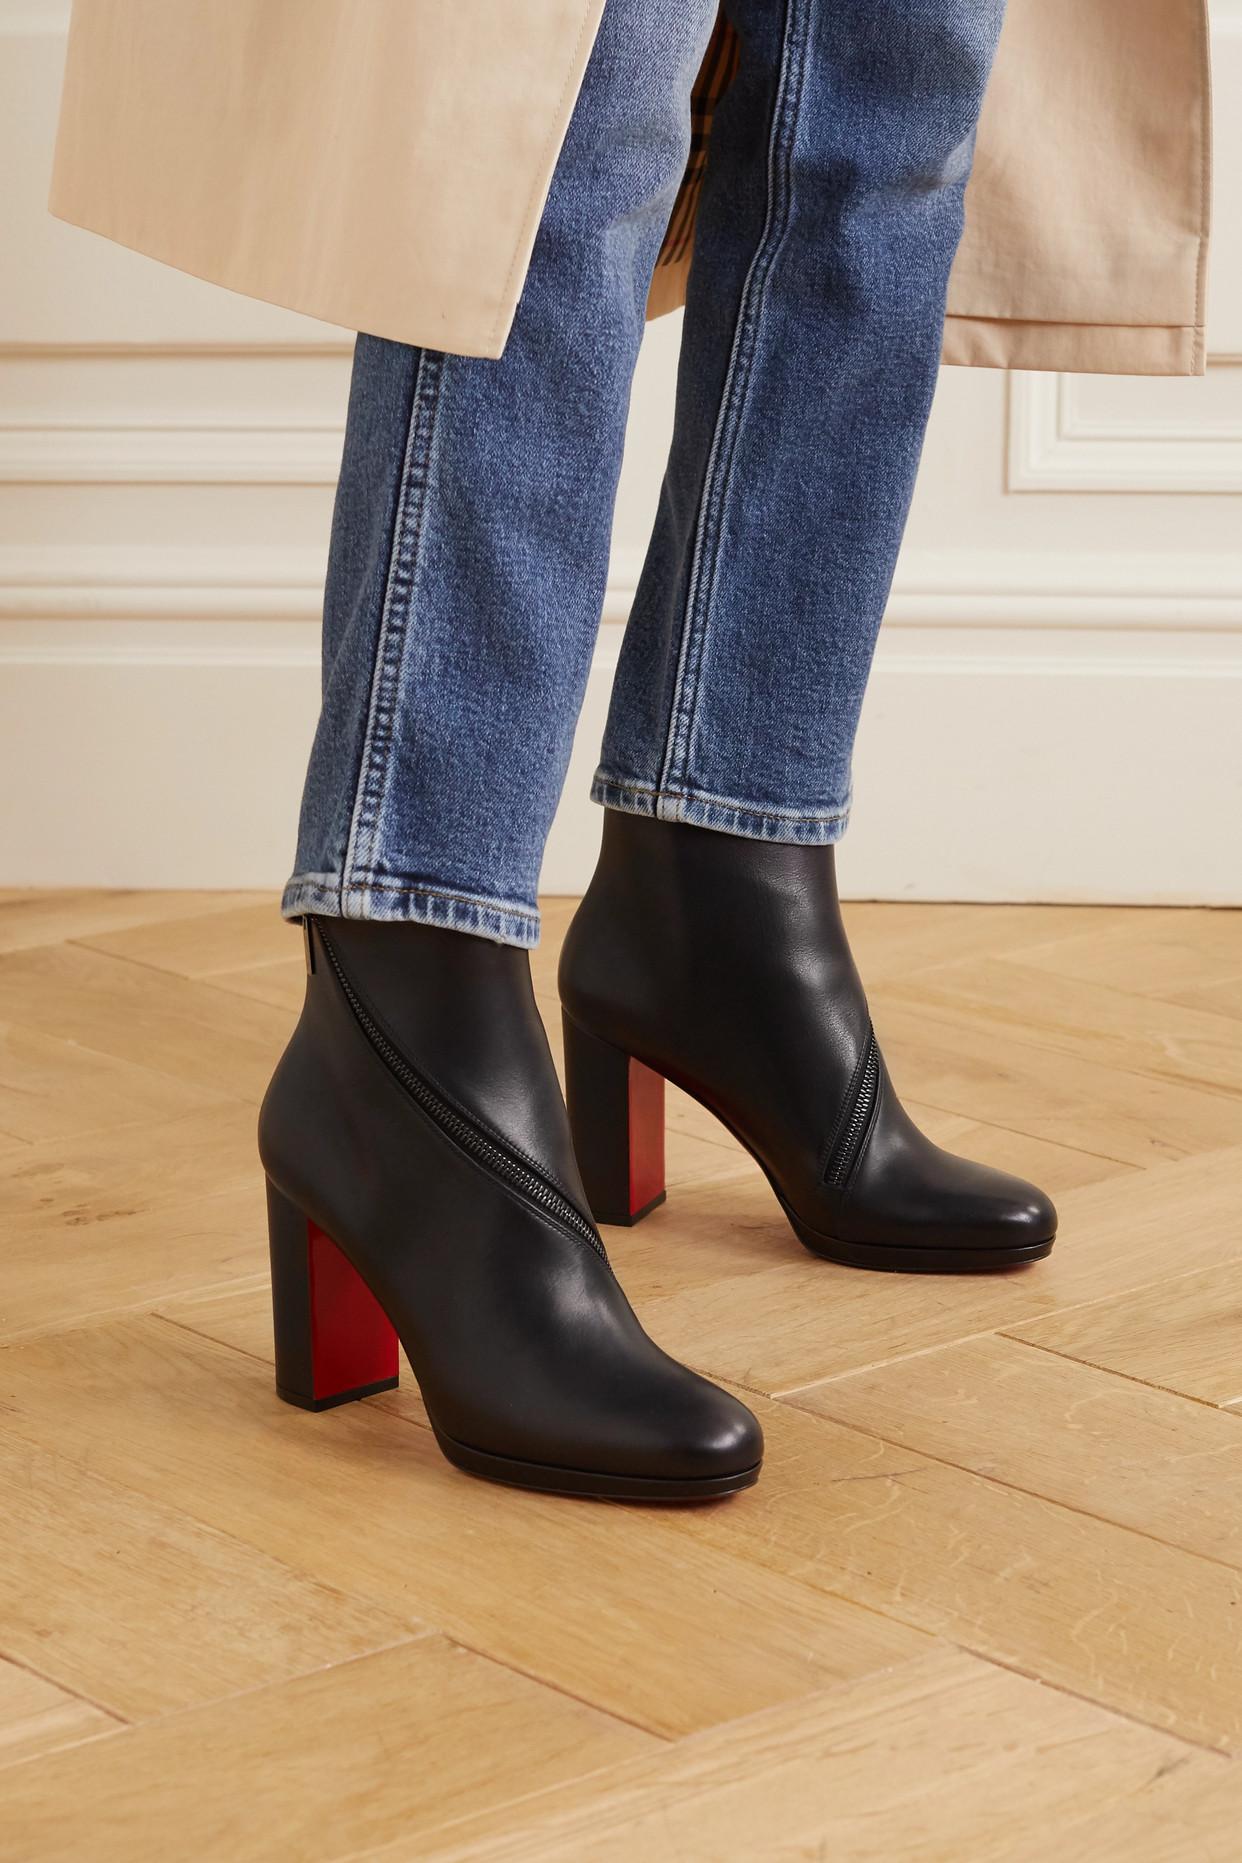 Christian Louboutin Birgitta 100 Zip-detailed Leather Ankle Boots in